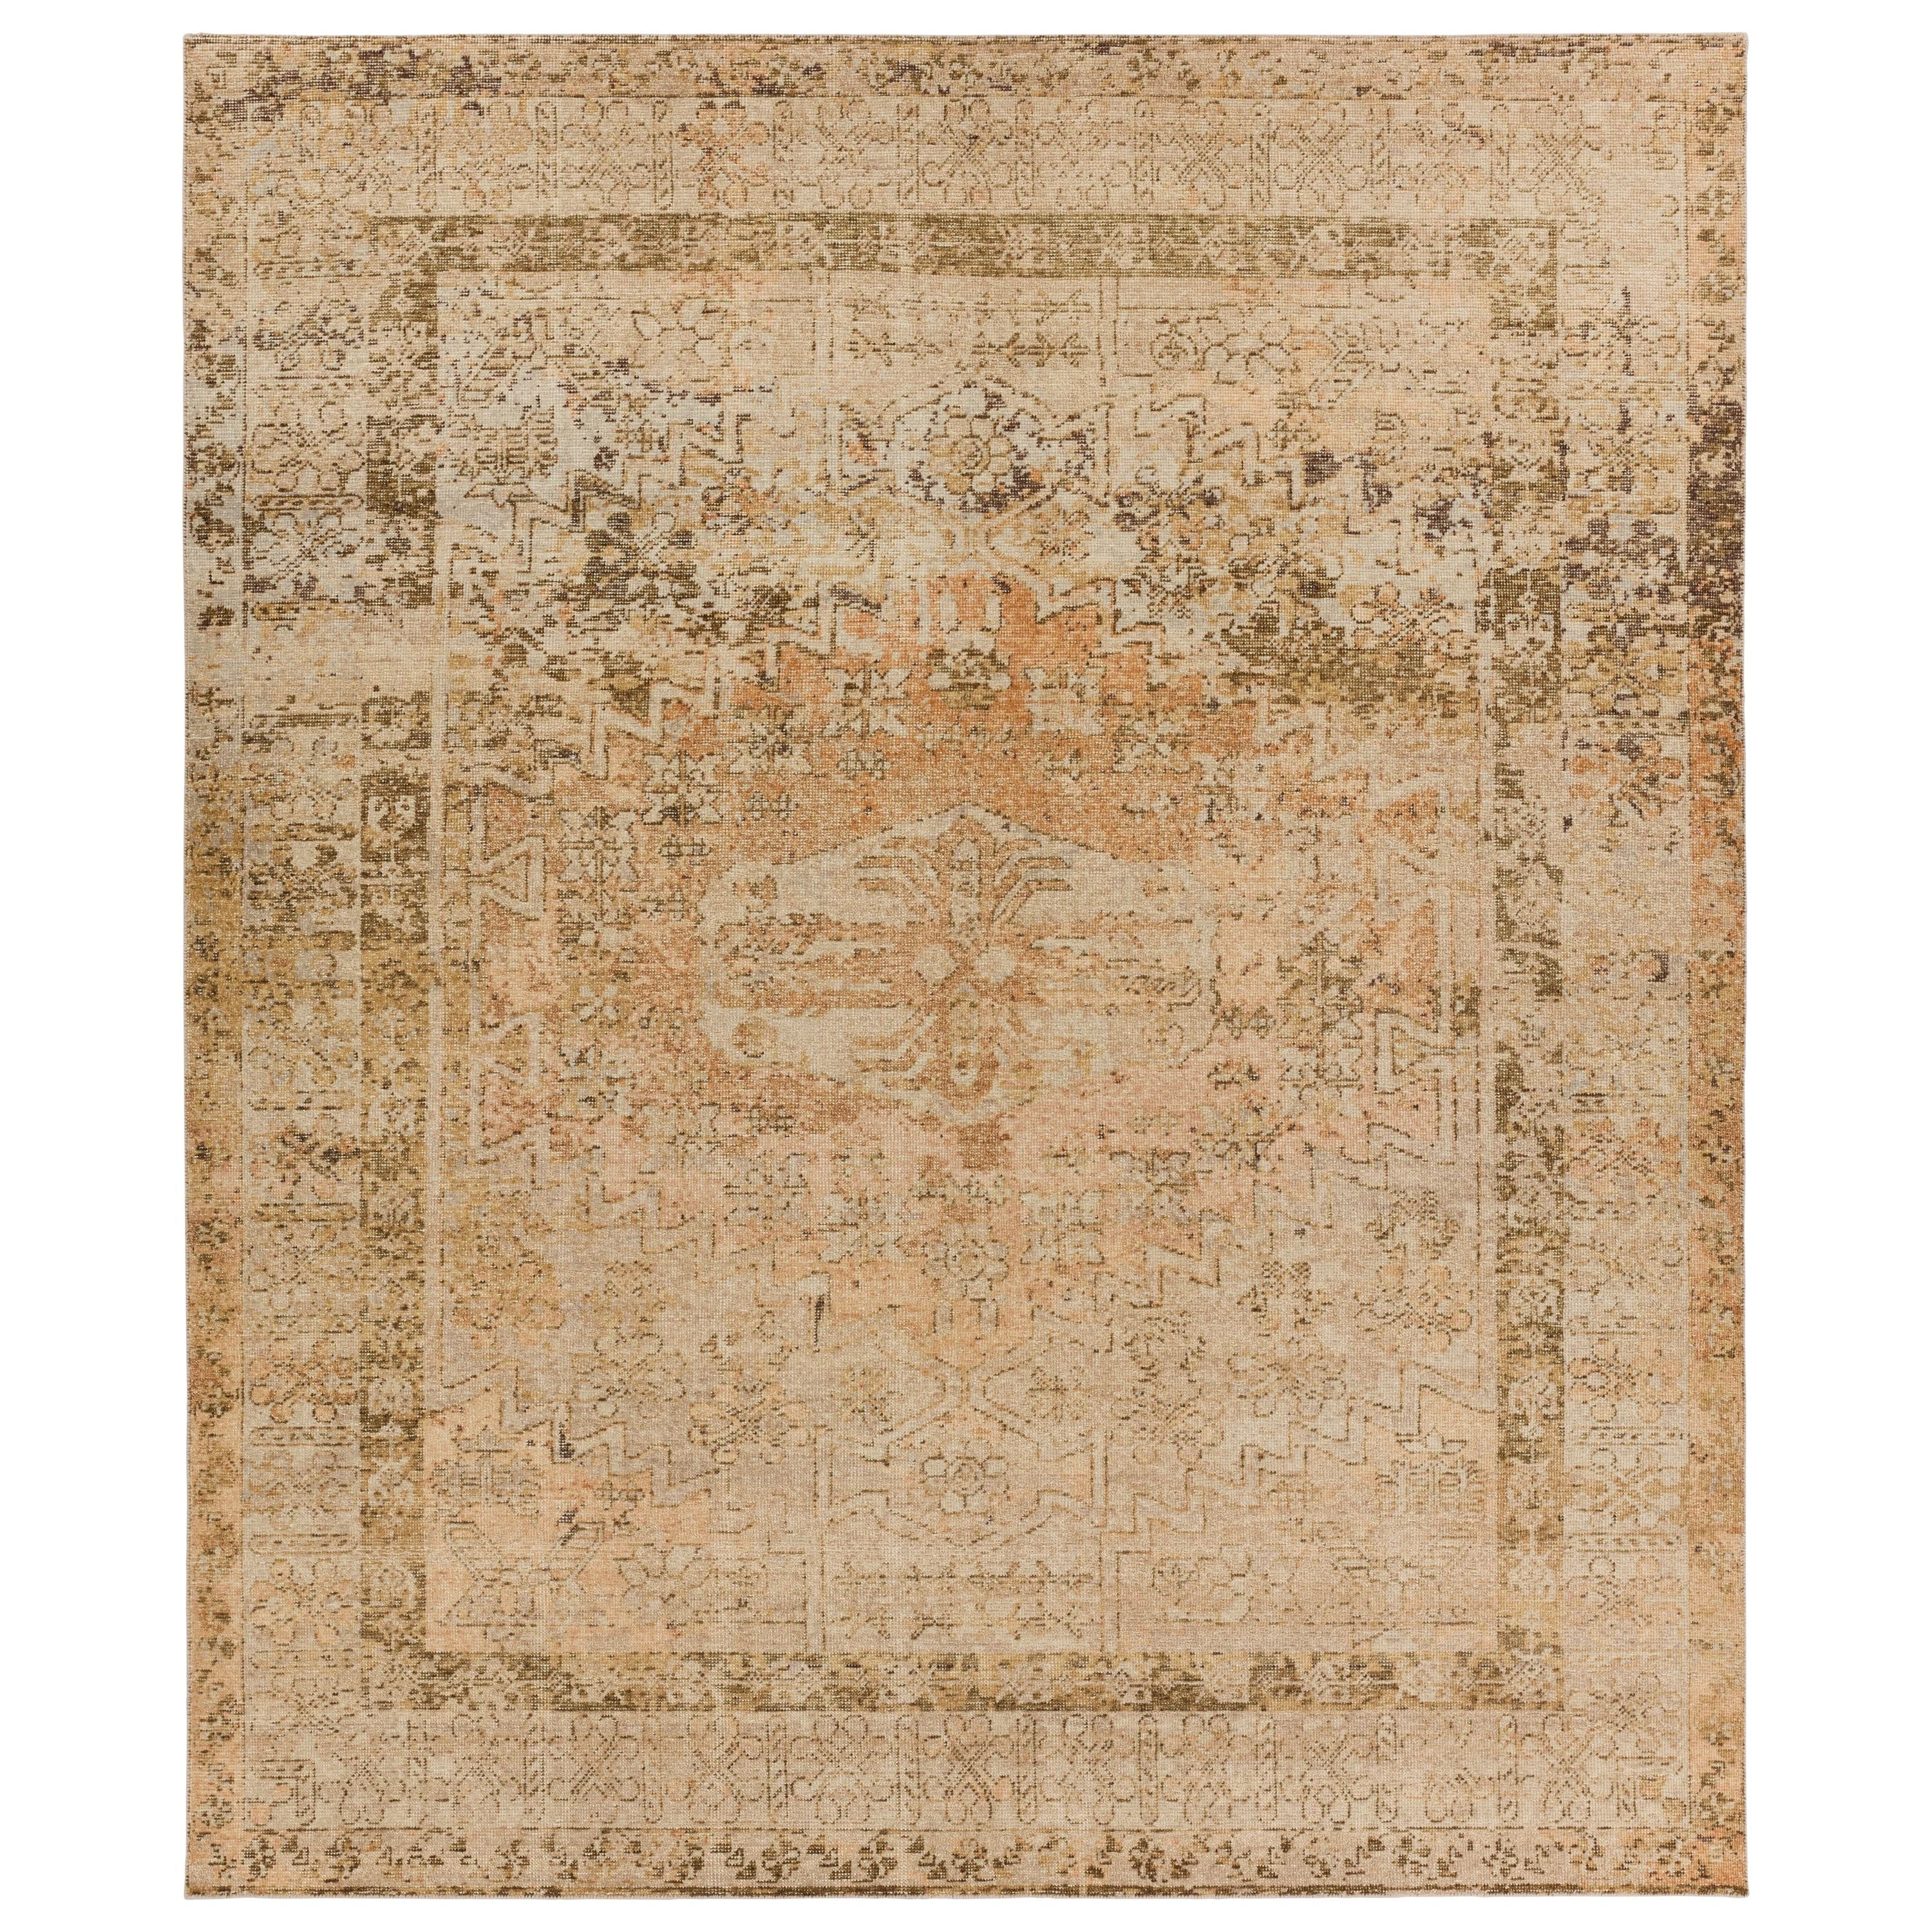 The Onessa collection marries traditional motifs with soft, subdued colorways for the perfect blend of fresh and time-honored style. These hand-knotted wool rugs feature a hand-sheared quality that lends the design a coveted vintage impression. The Elinor rug features a heavily distressed, medallion pattern in hues of brown, terracotta, muted gold, cream, and gray. Amethyst Home provides interior design, new construction, custom furniture, and area rugs in the Salt Lake City metro area.